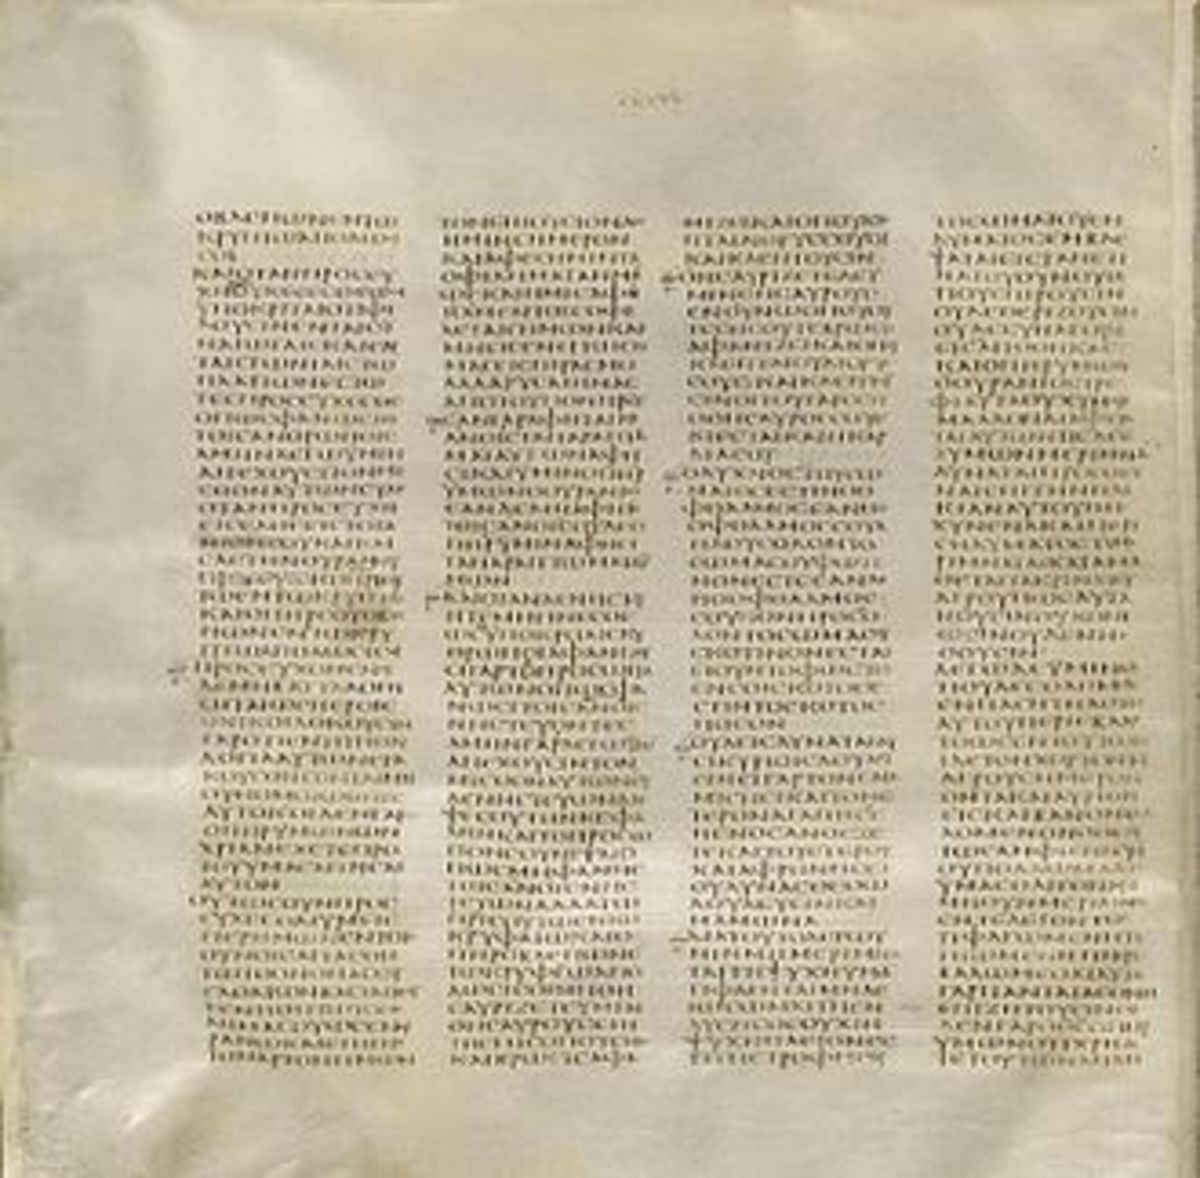 A page from Codex Sinaiticus